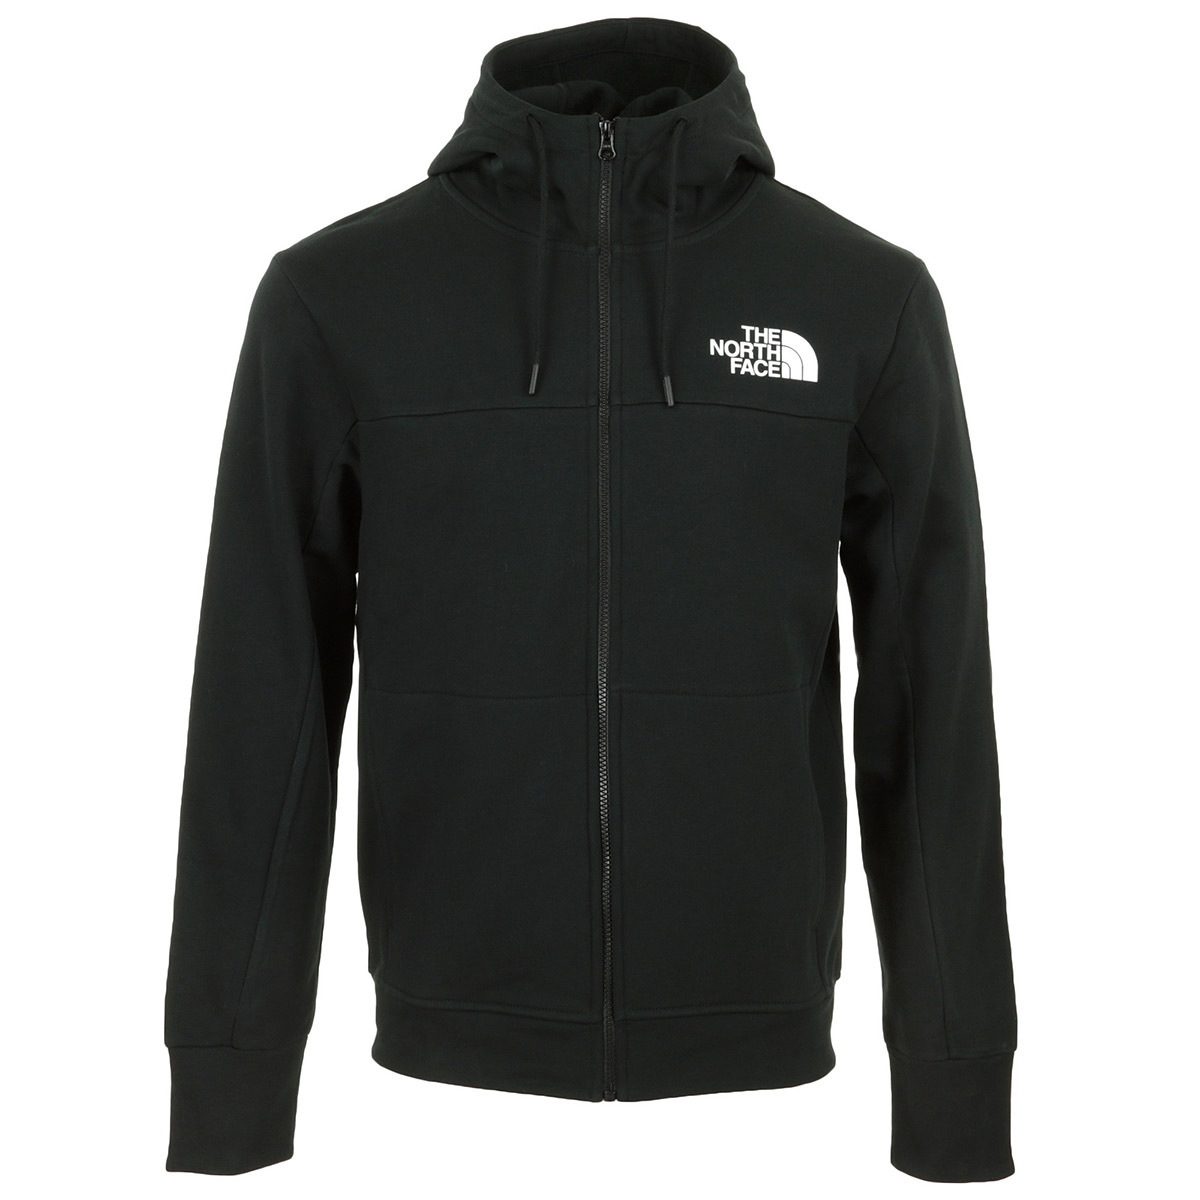 The North Face "Himalayan Full Zip Hoodie"